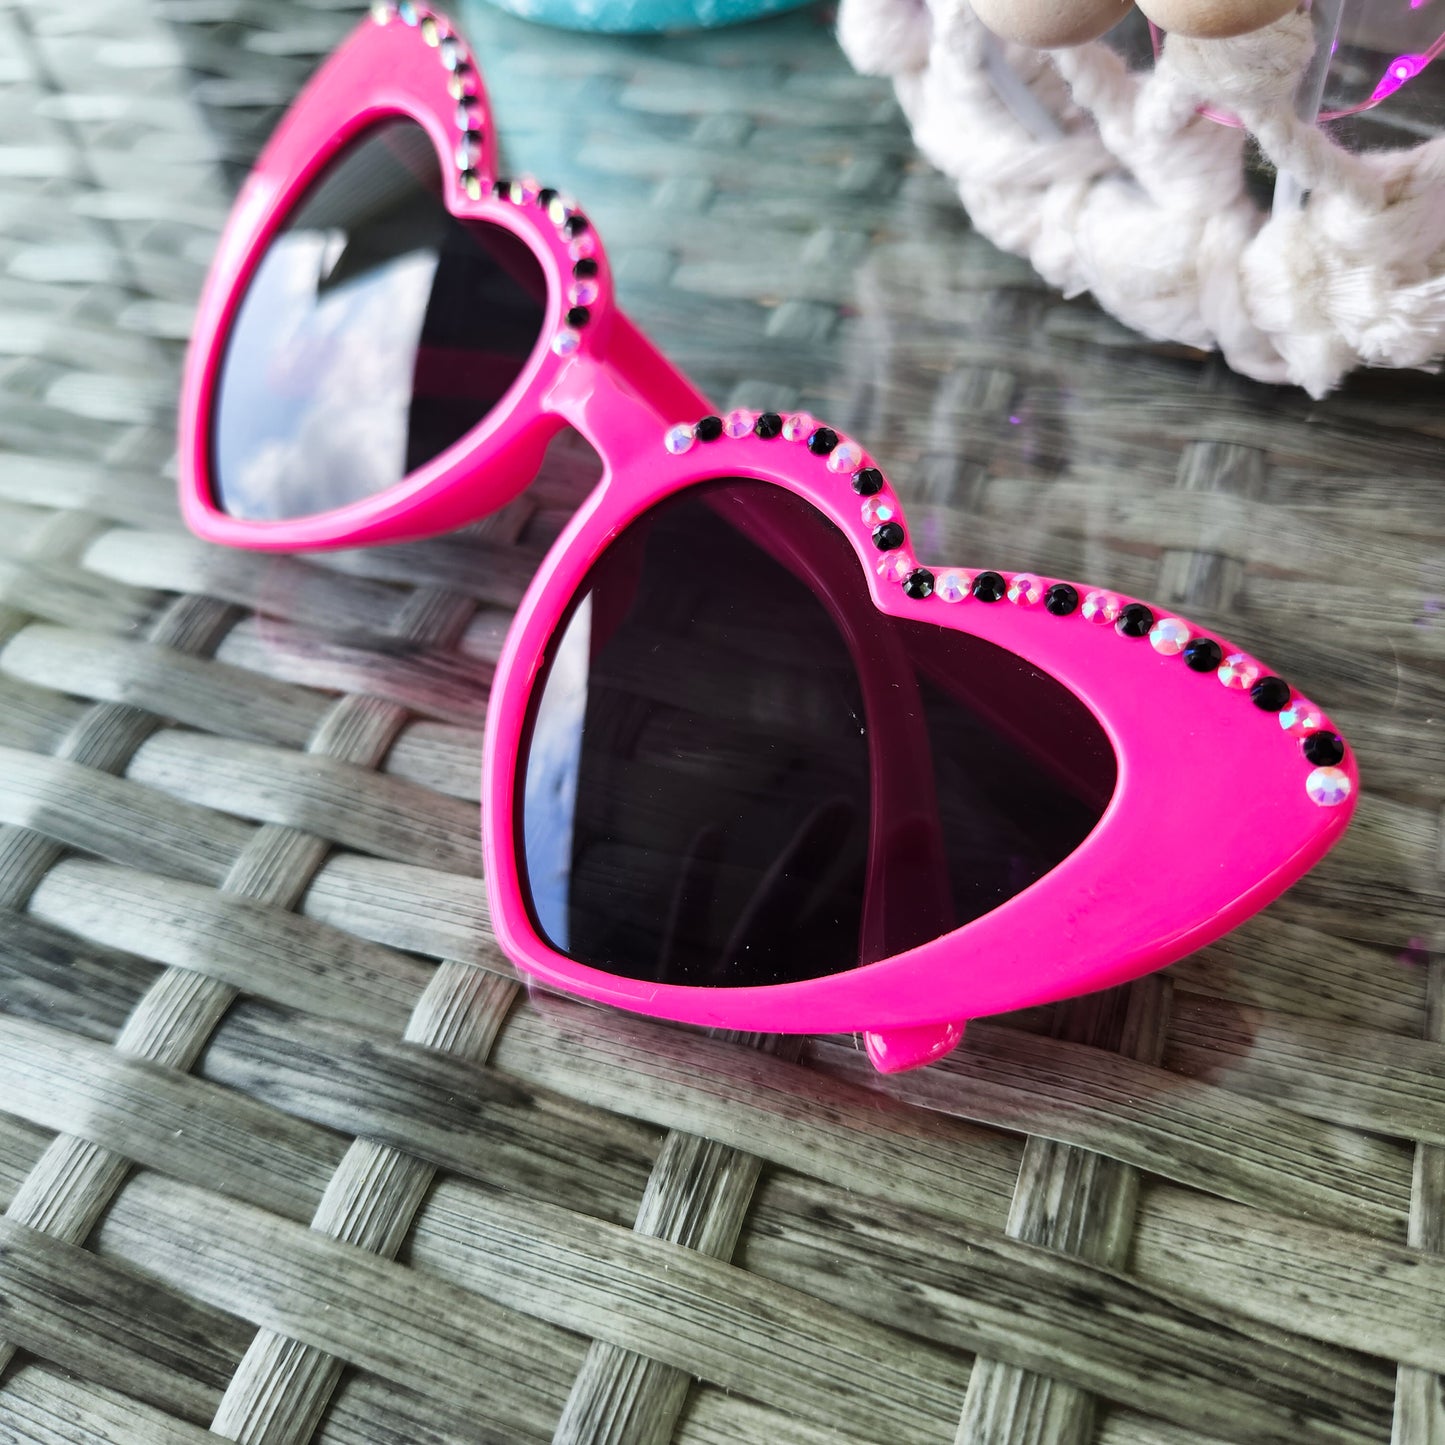 Malibu Pink Heart Shaped Sunnies with Black and Pink Rhinestone Accents